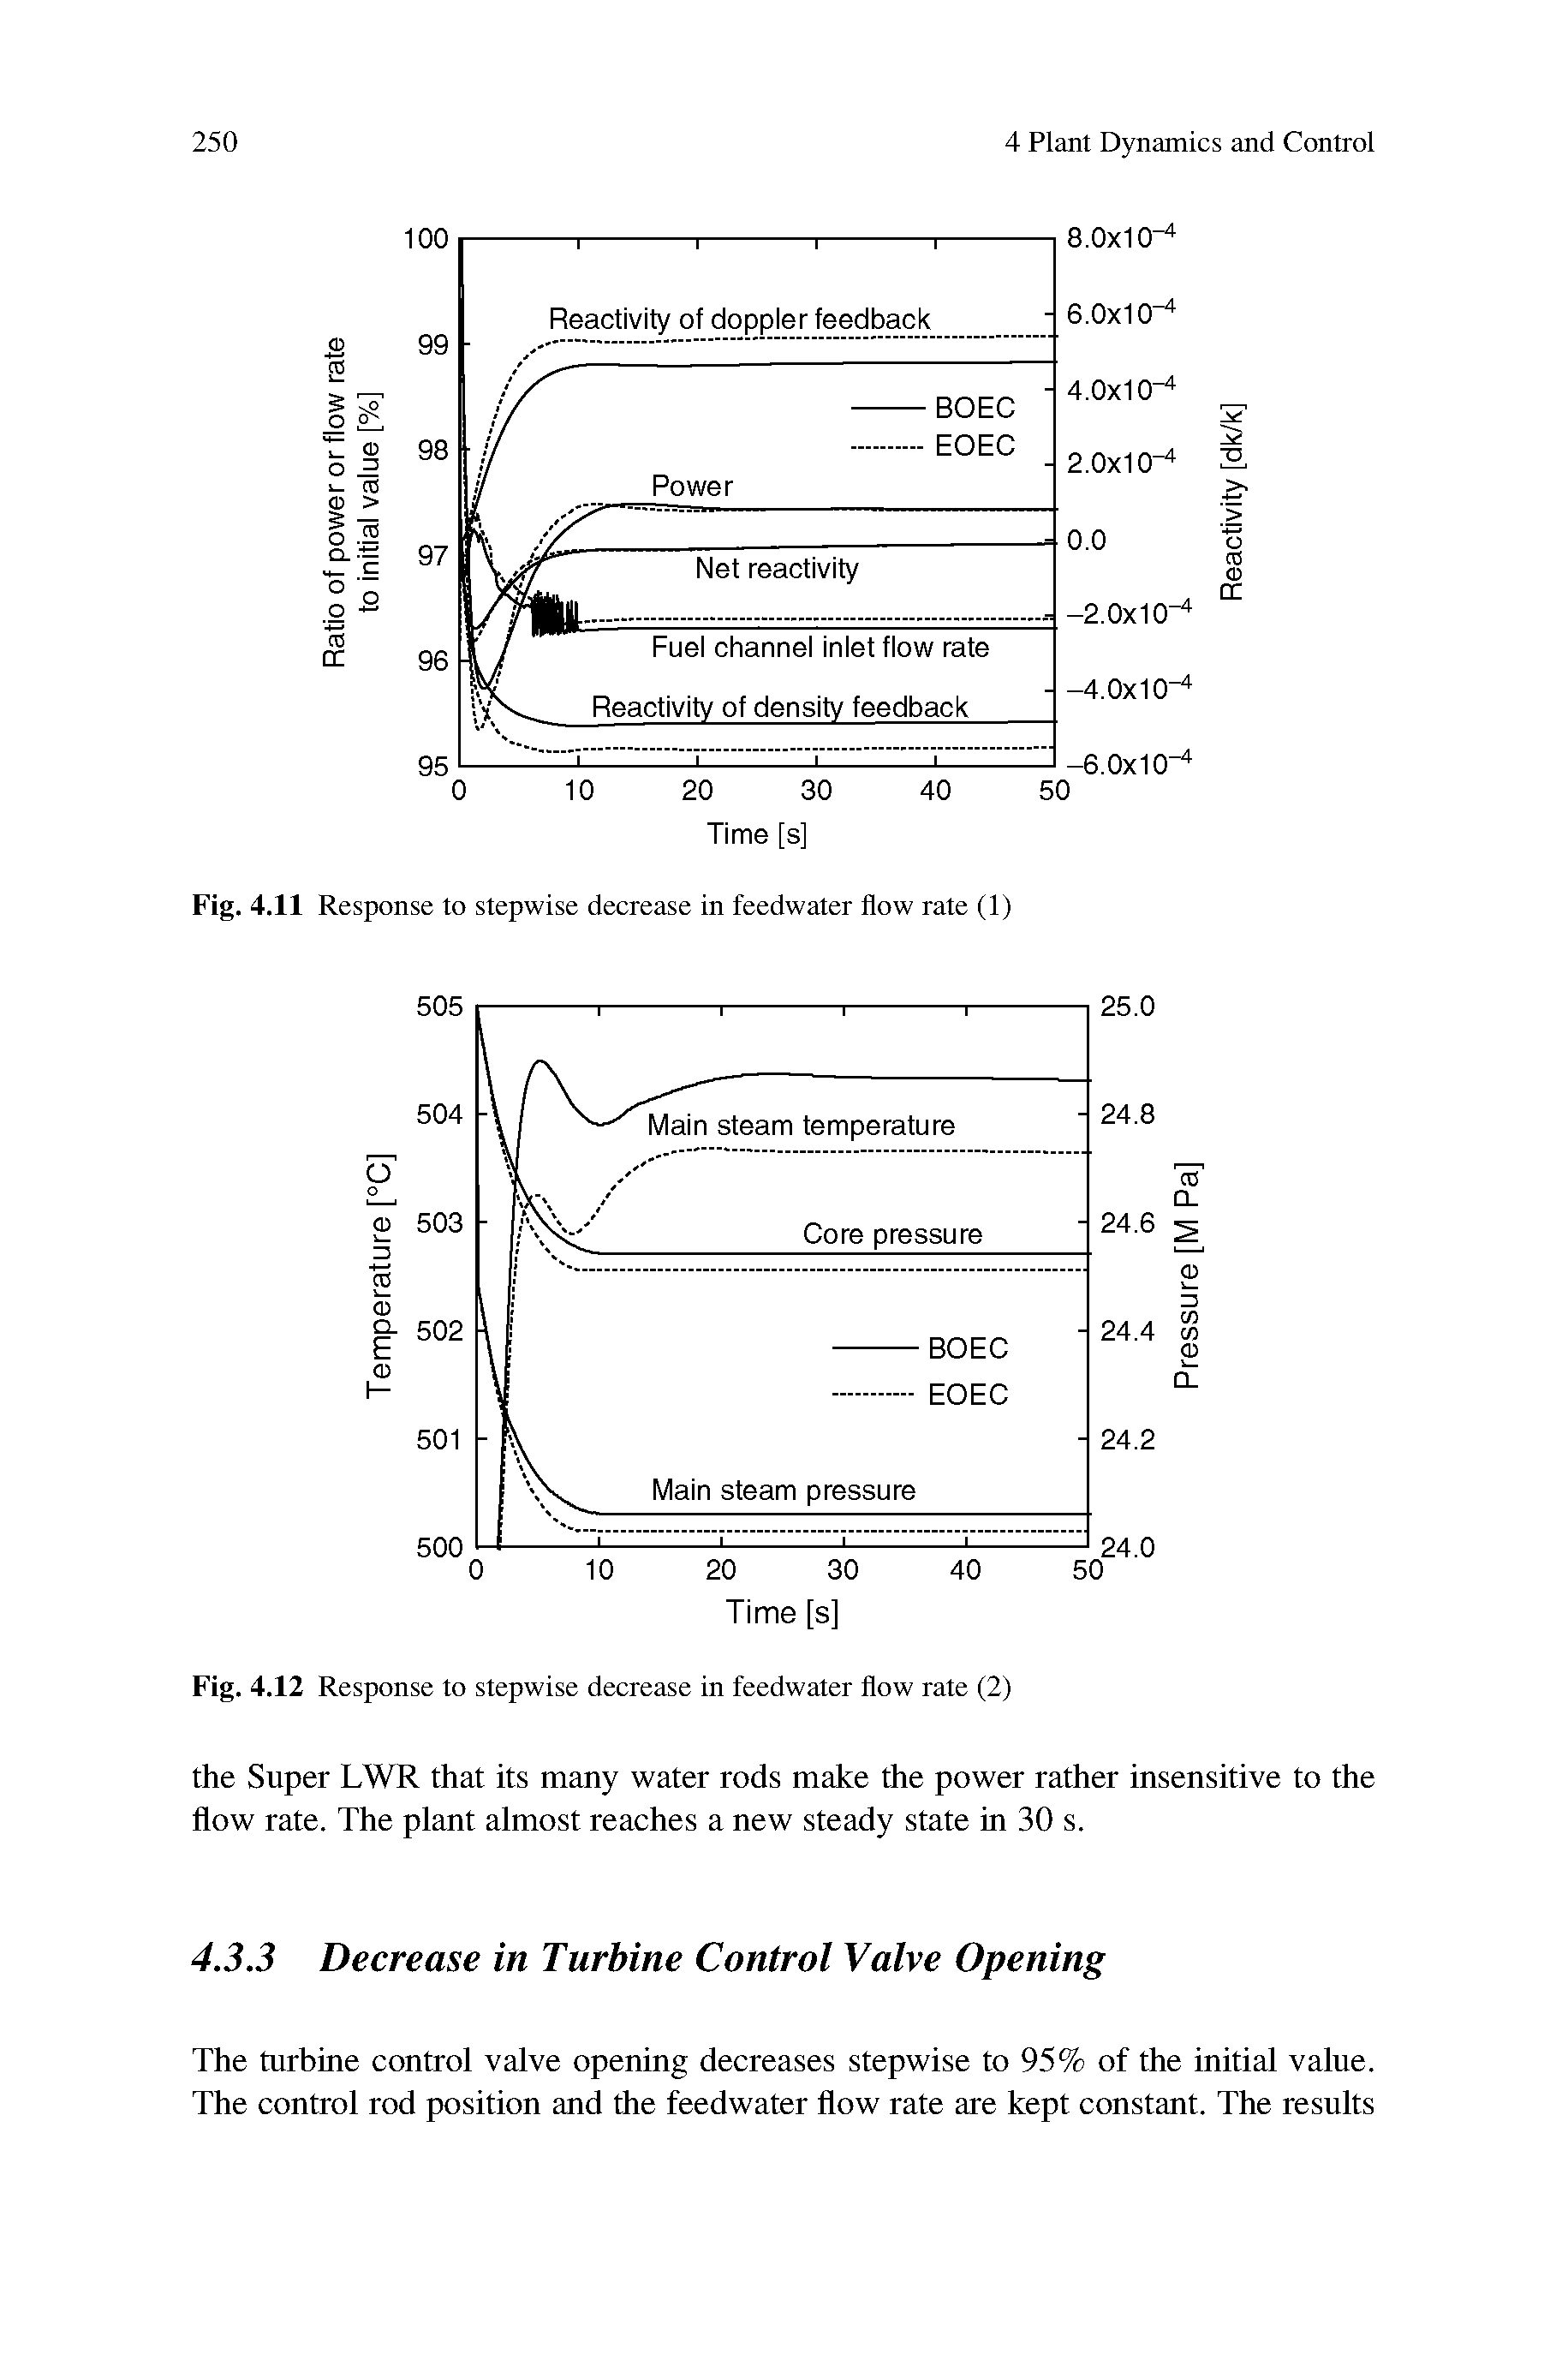 Fig. 4.11 Response to stepwise decrease in feedwater flow rate (1)...